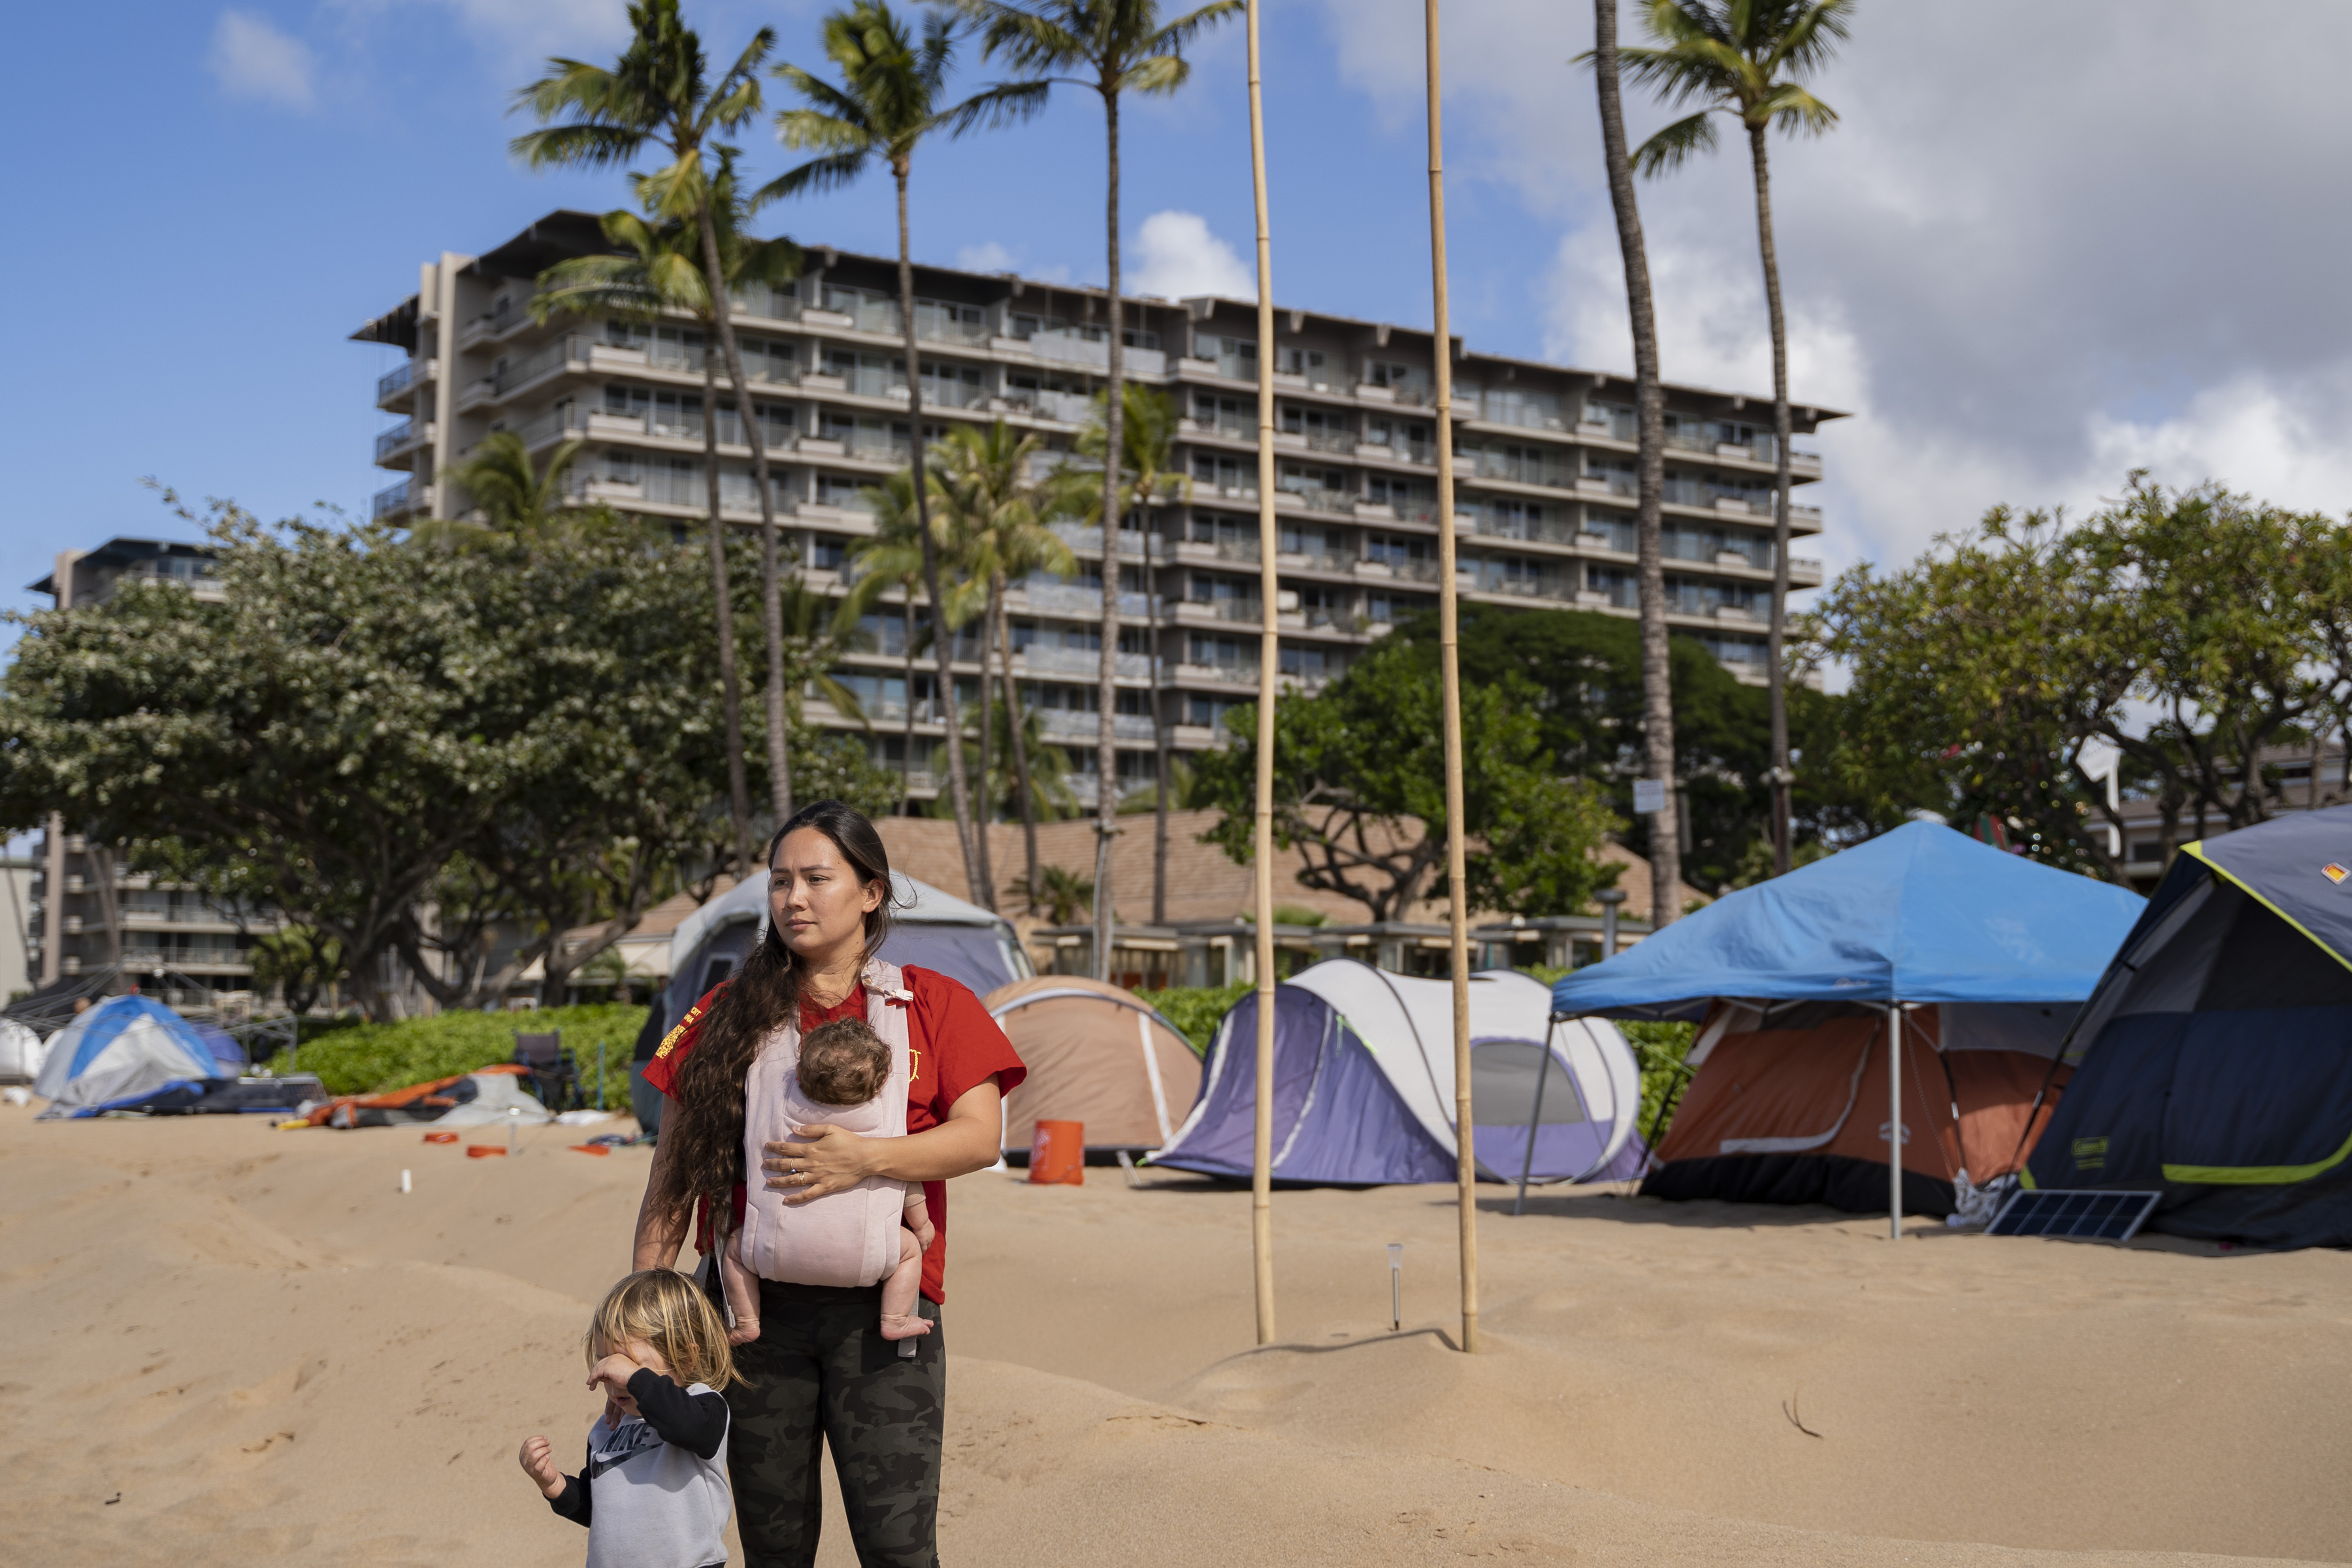 A woman with two young children stands on a beach in front of a multistory hotel, palm trees, and tents.